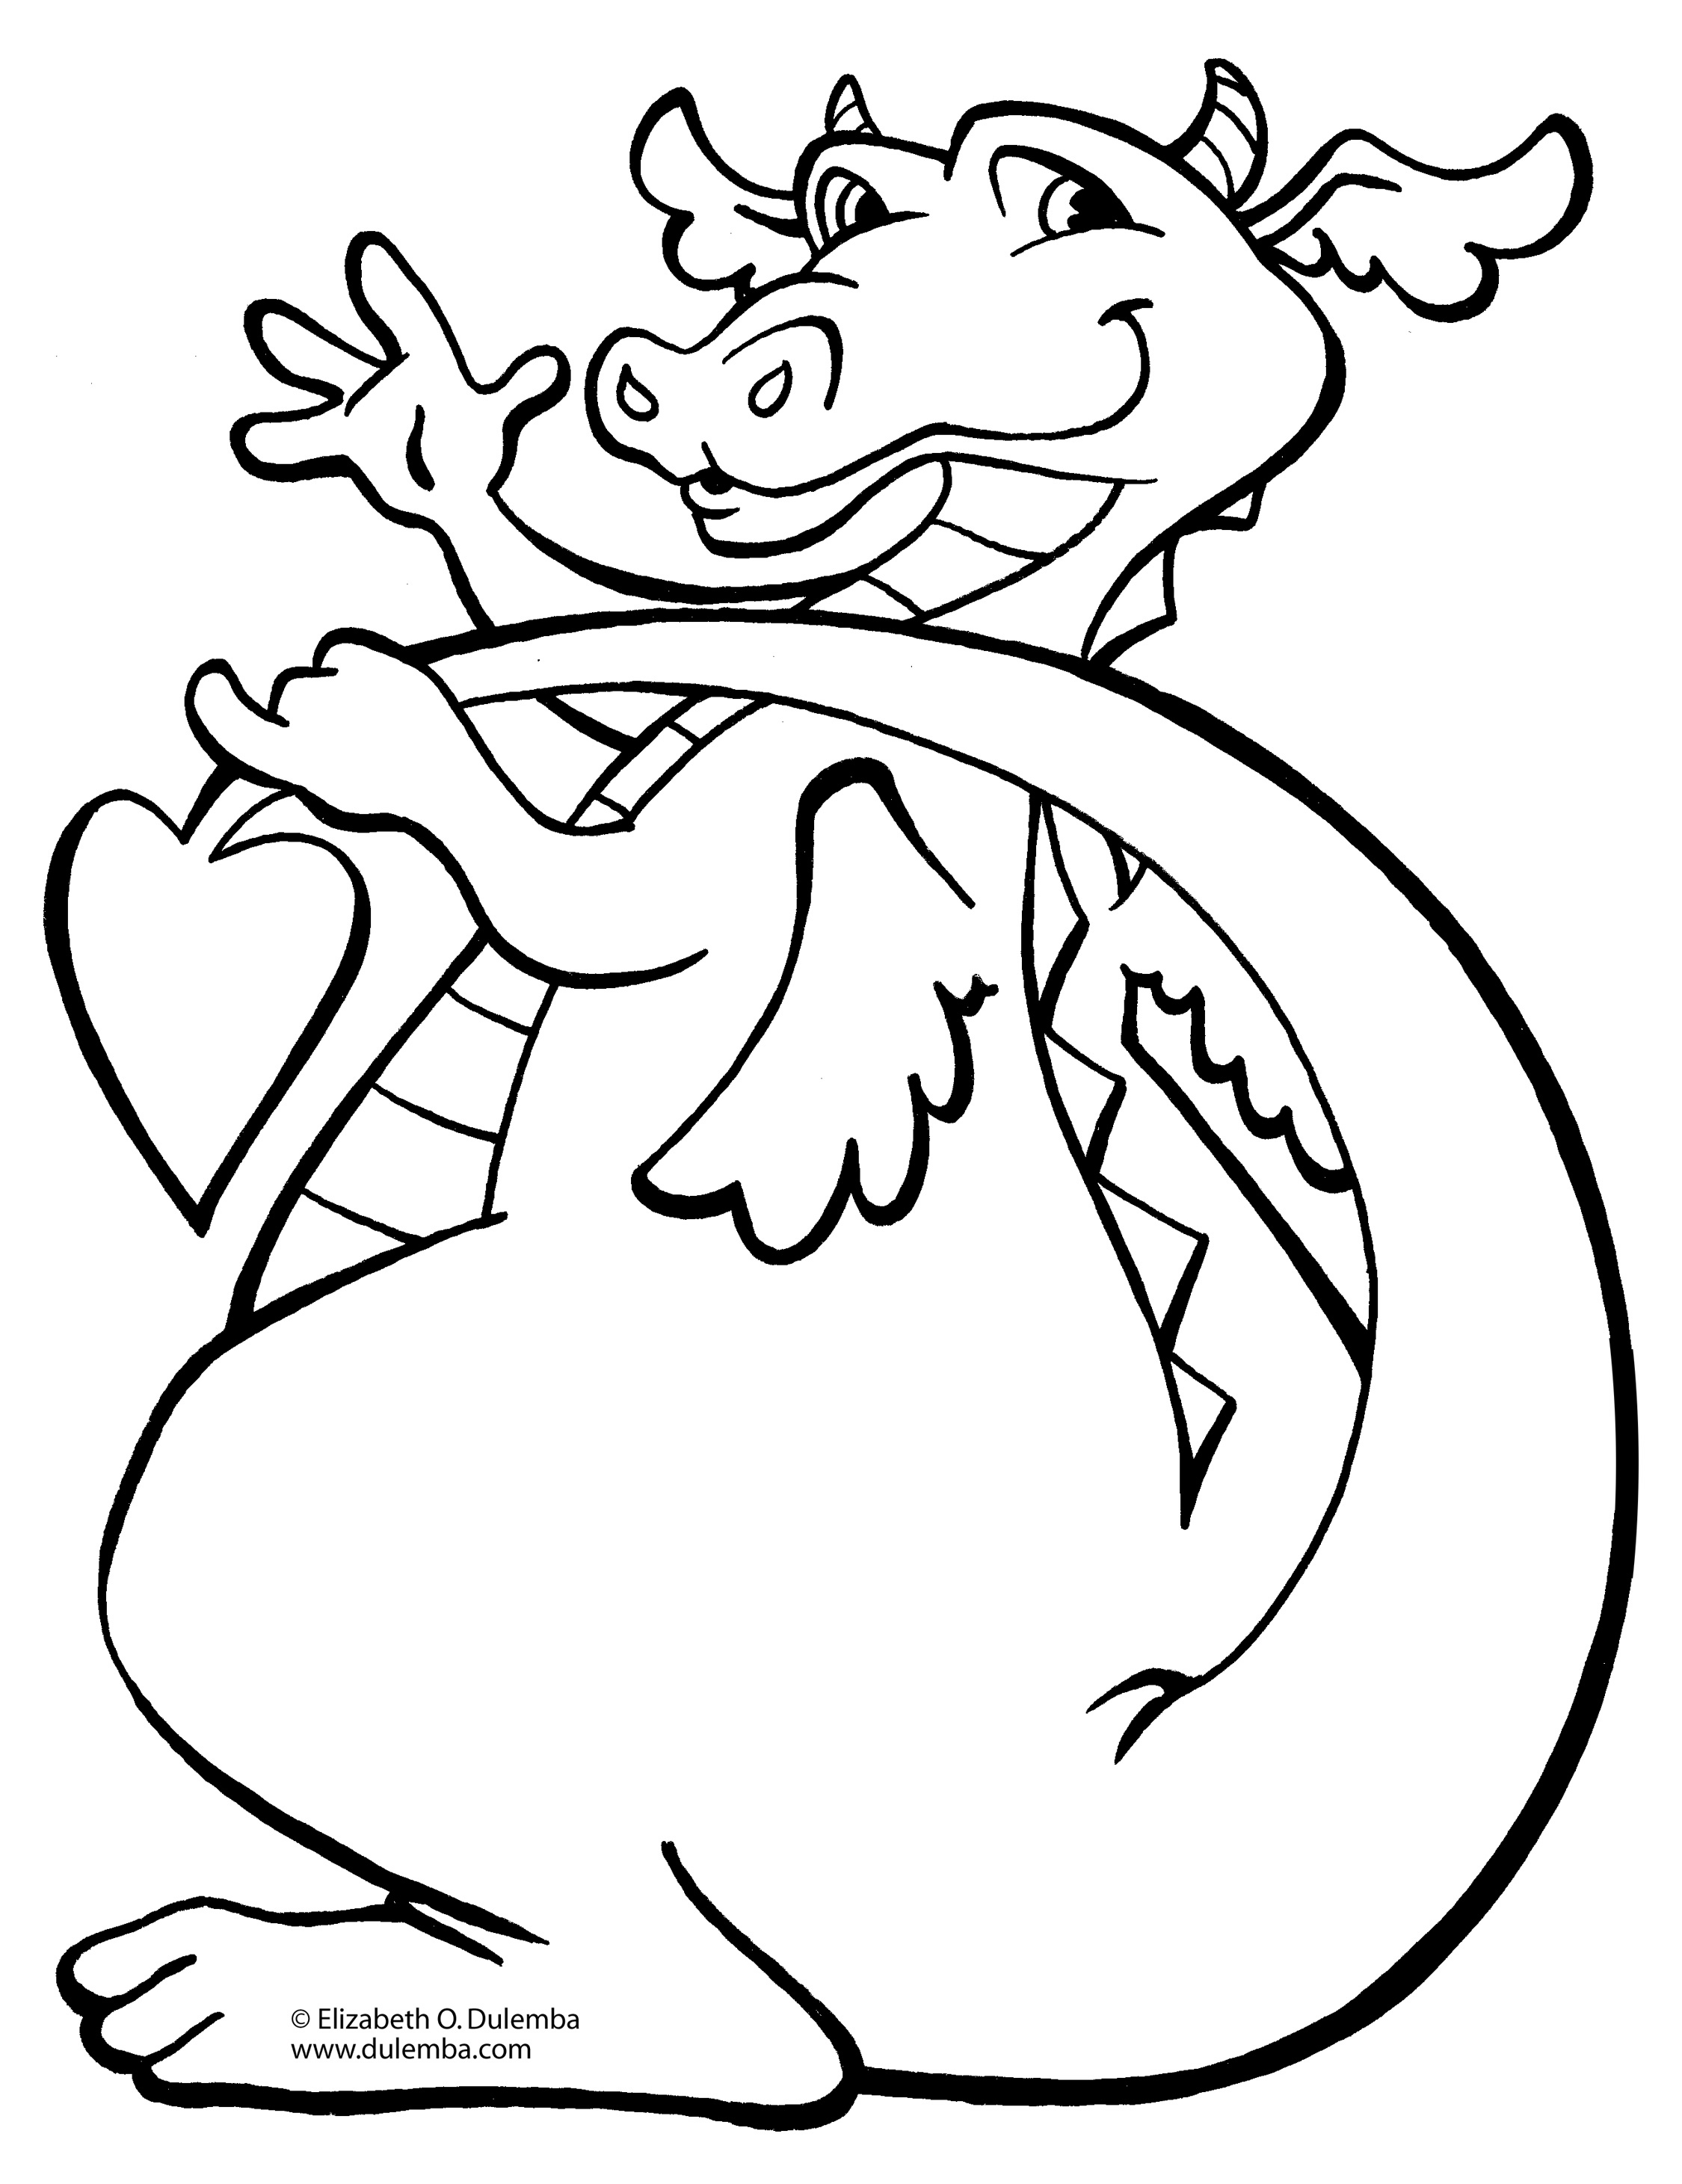 cool dragon coloring pages | Coloring Picture HD For Kids ...